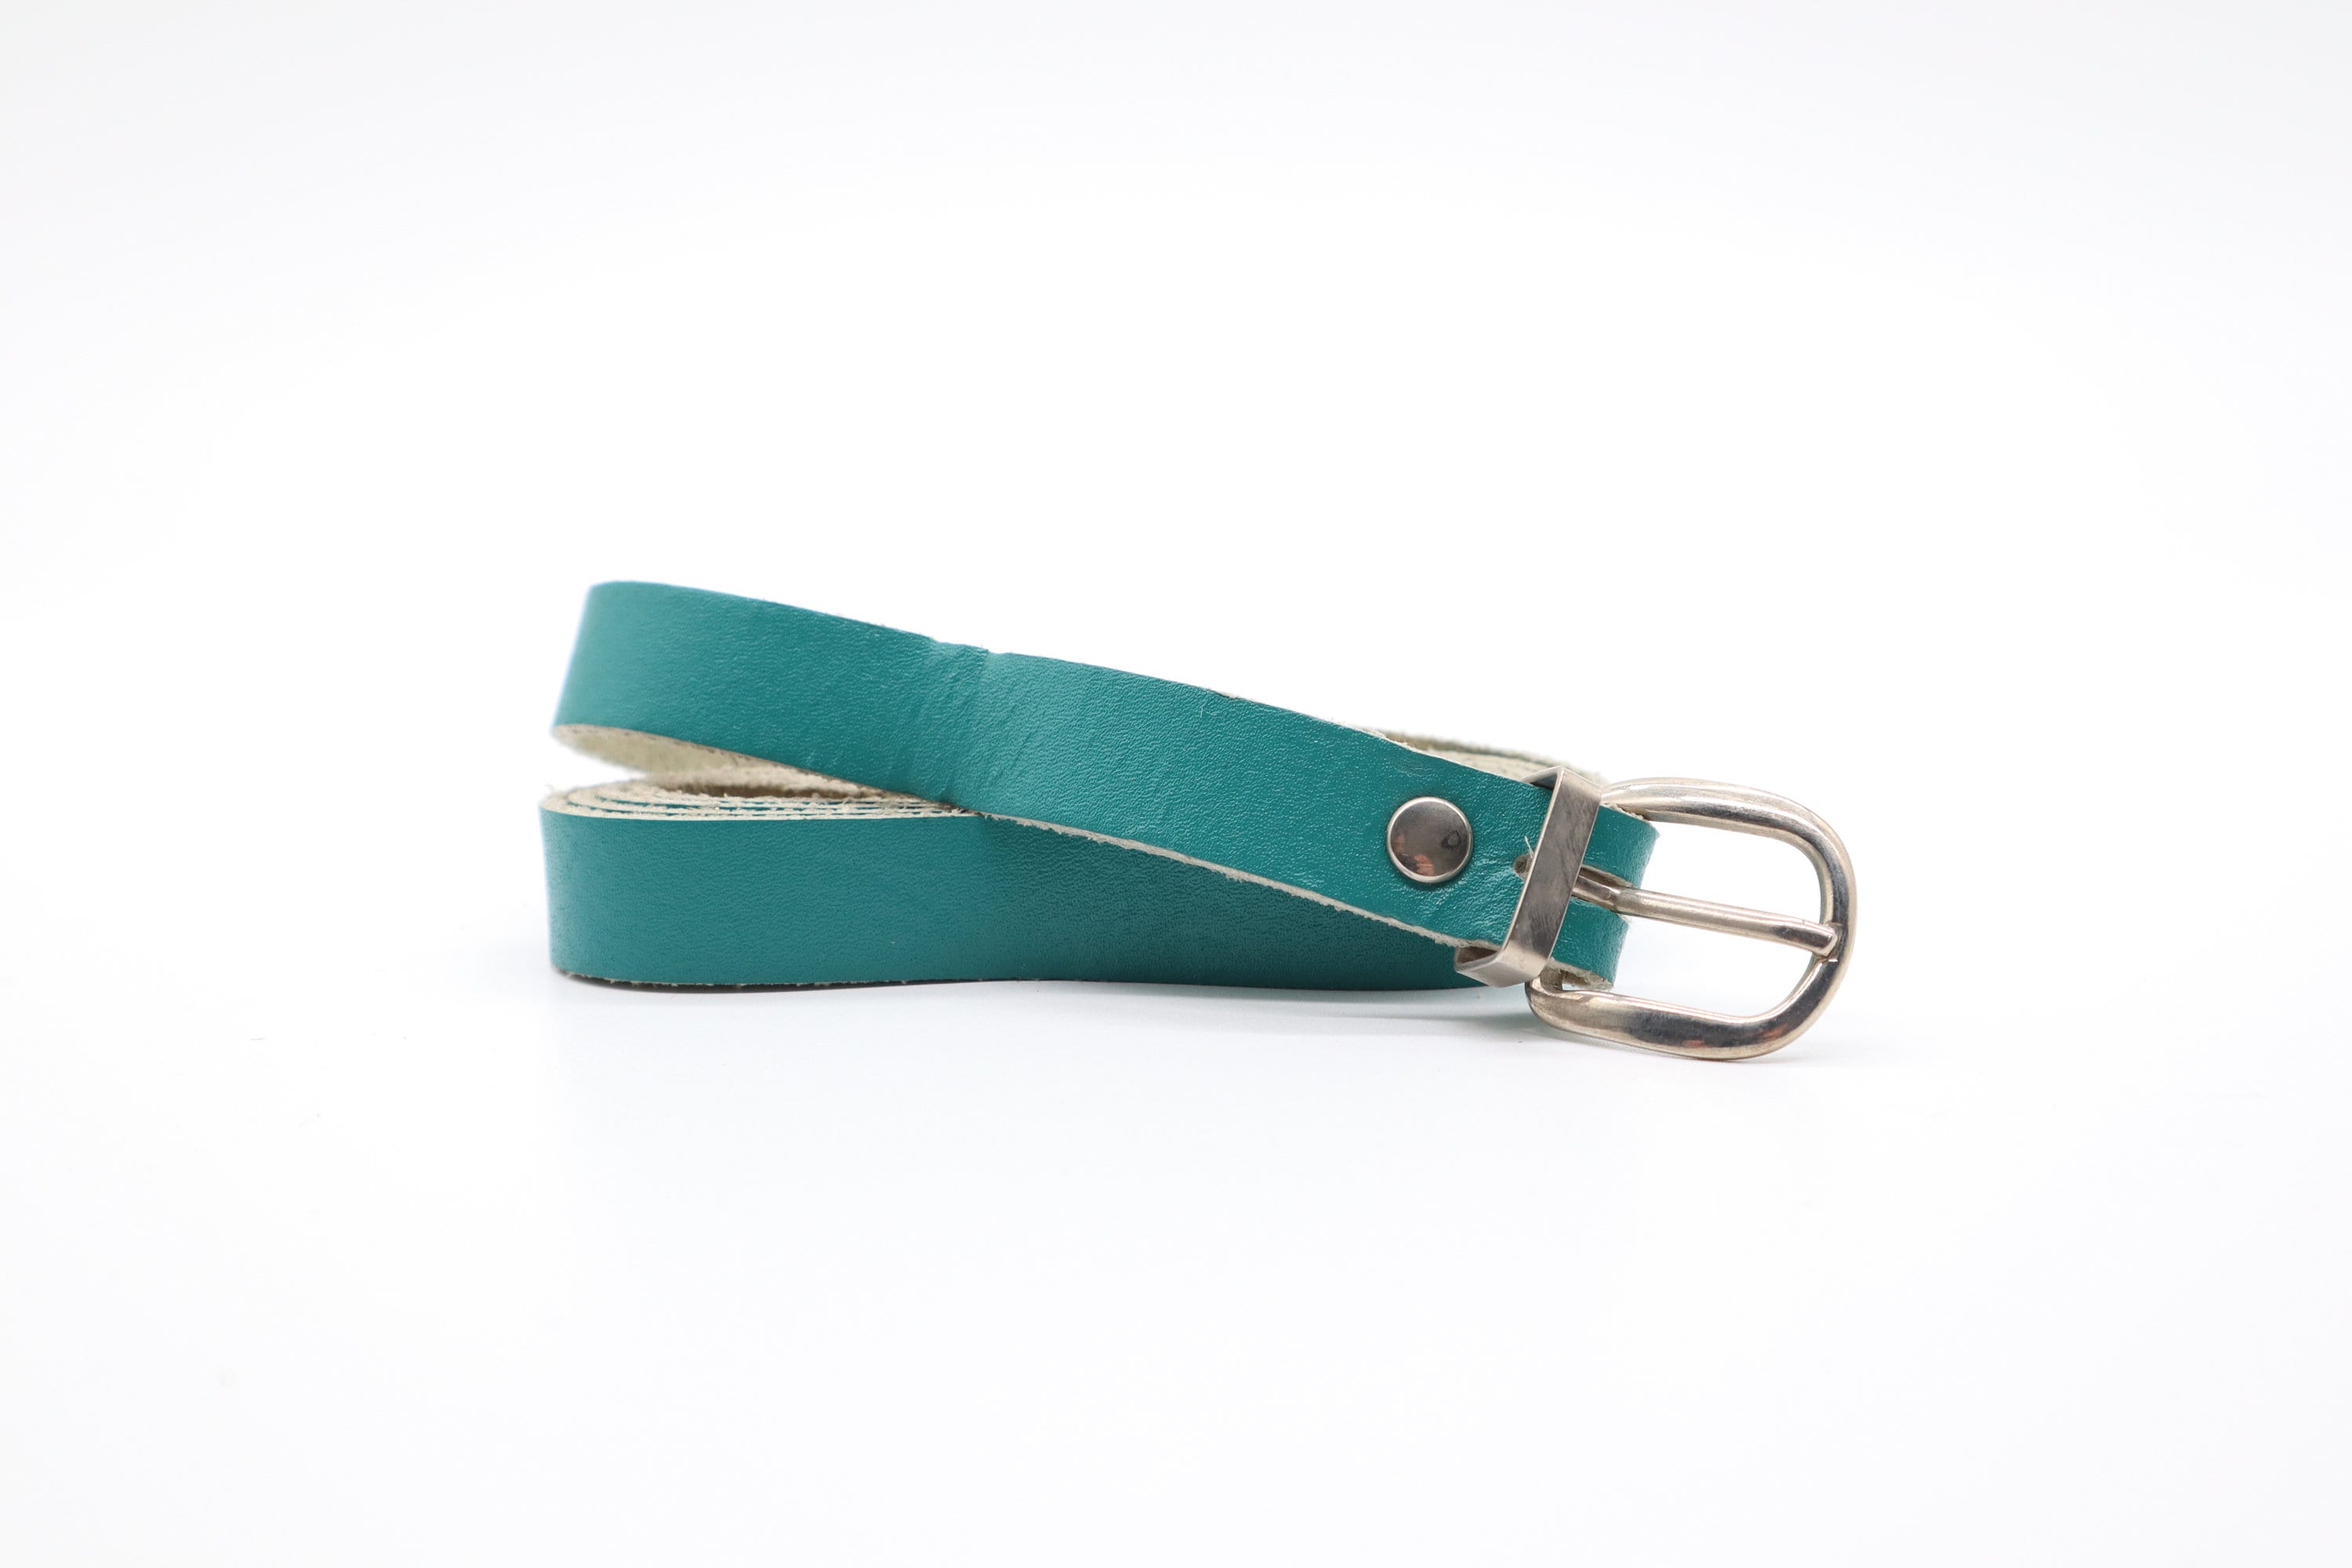 Premium Unisex Designer Belt Options, Top Quality Cowskin Material, No  Extra Cost From Miss_seller, $12.44